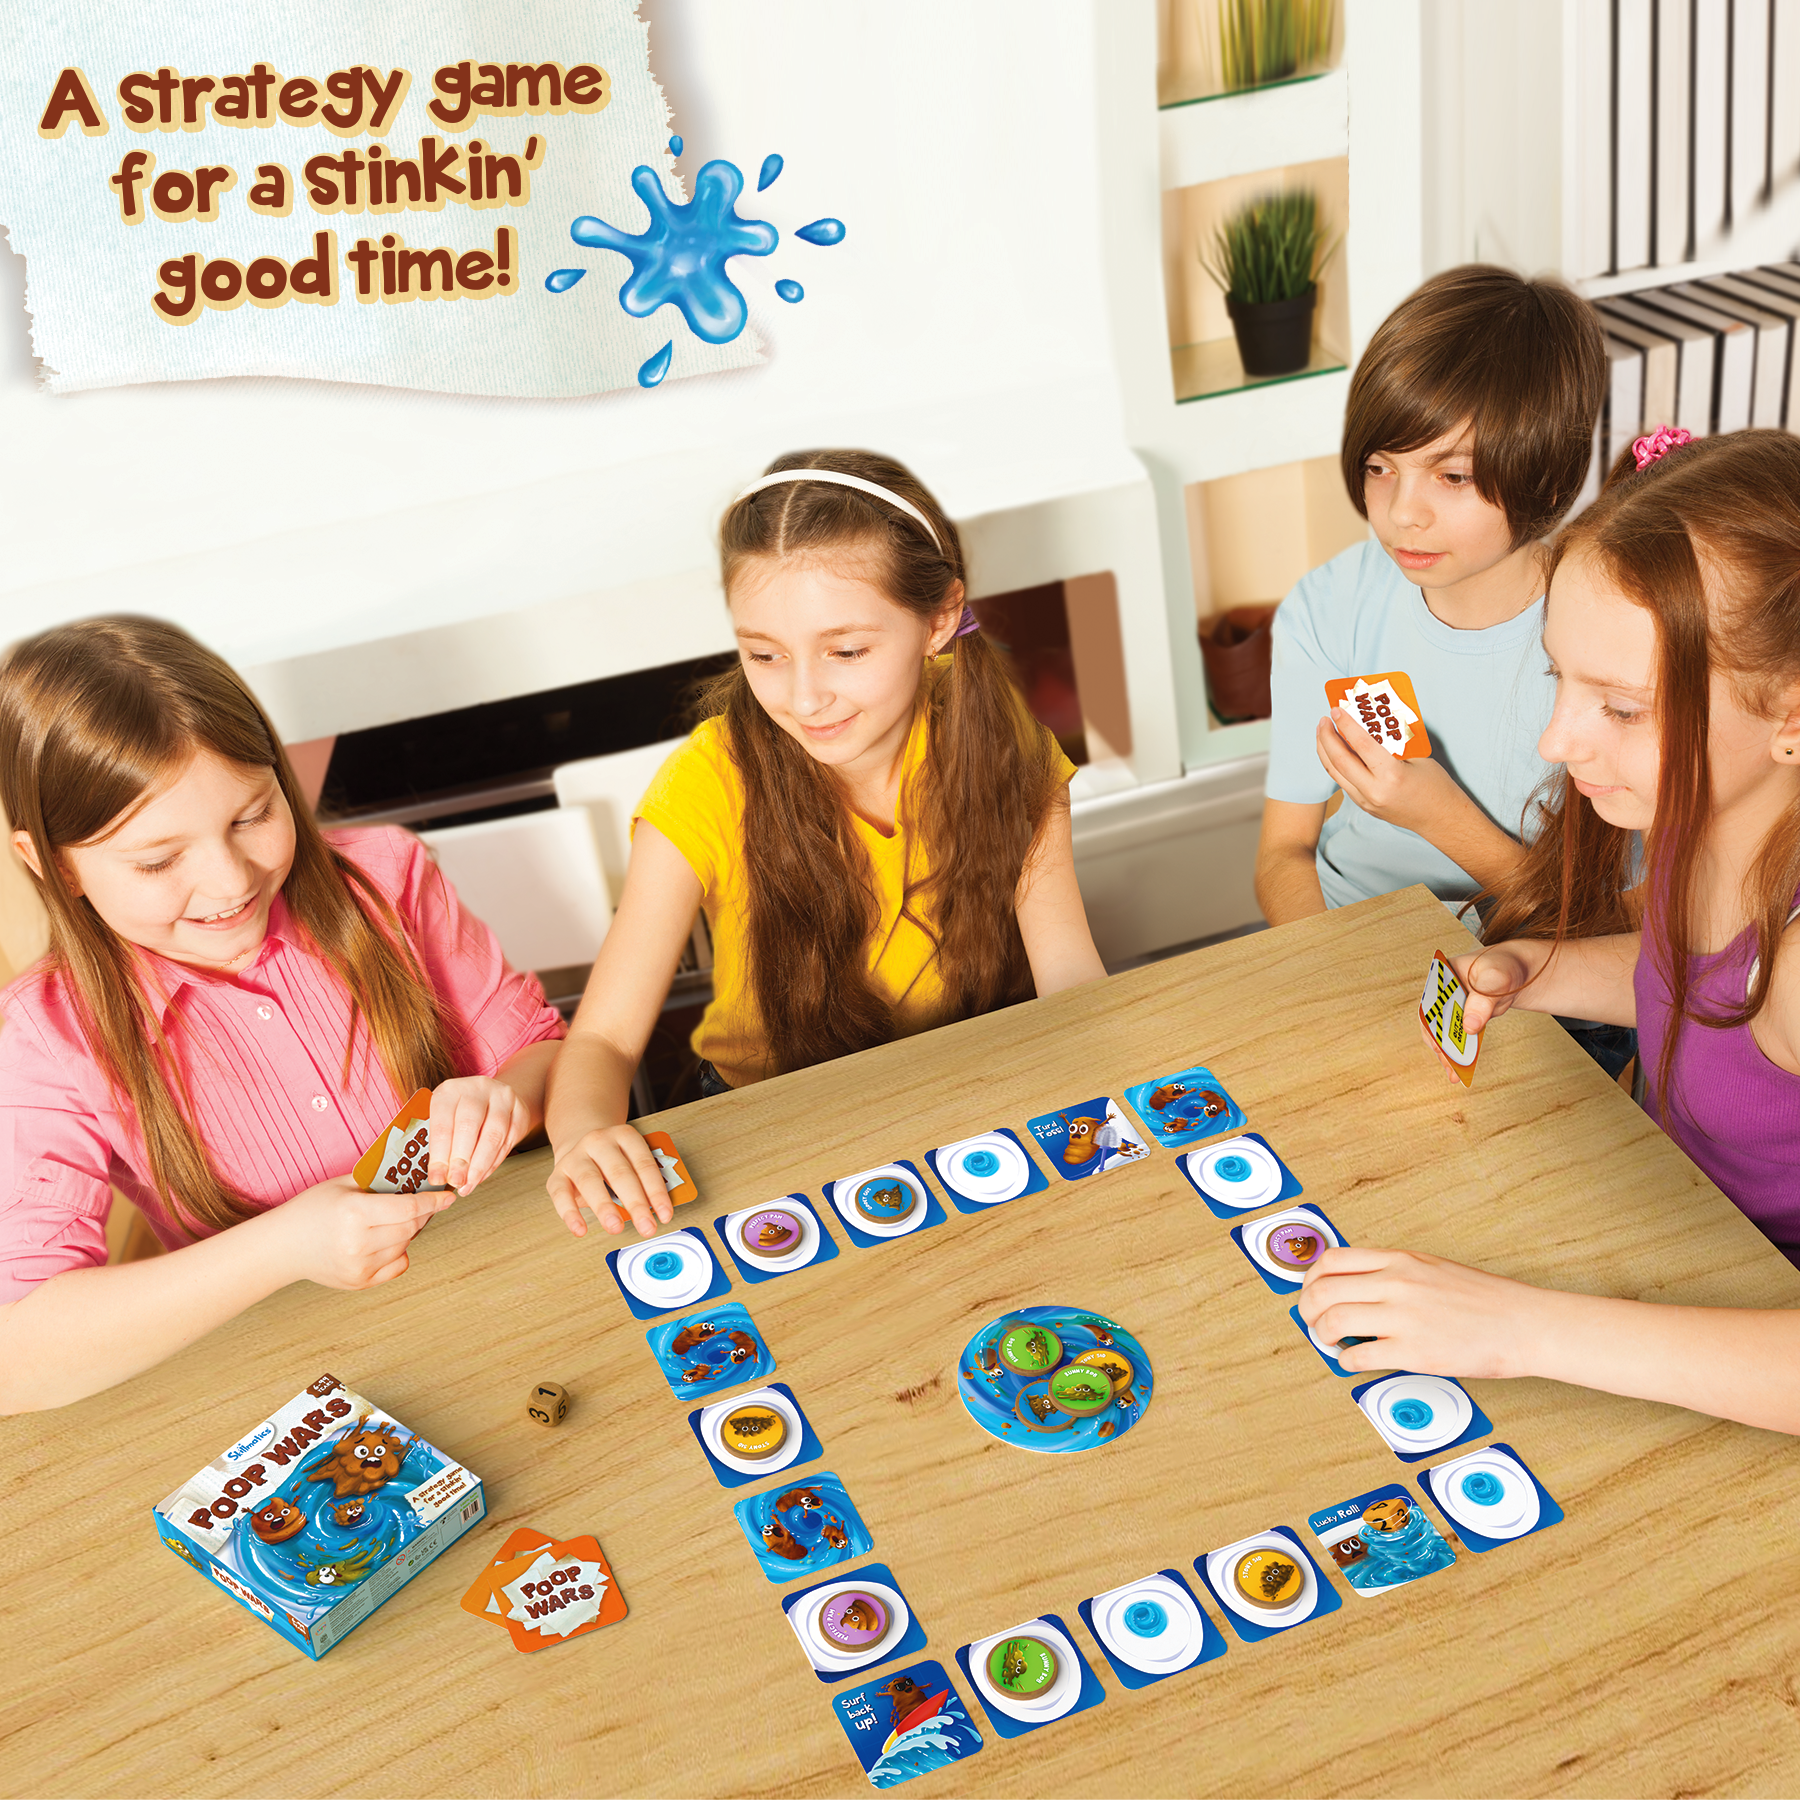 Skillmatics Card Game - Poop Wars, Fun & Fast-Paced Game Of Strategy, Party Game For Kids & Family, Gift For Girls & Boys Ages 6 & Up